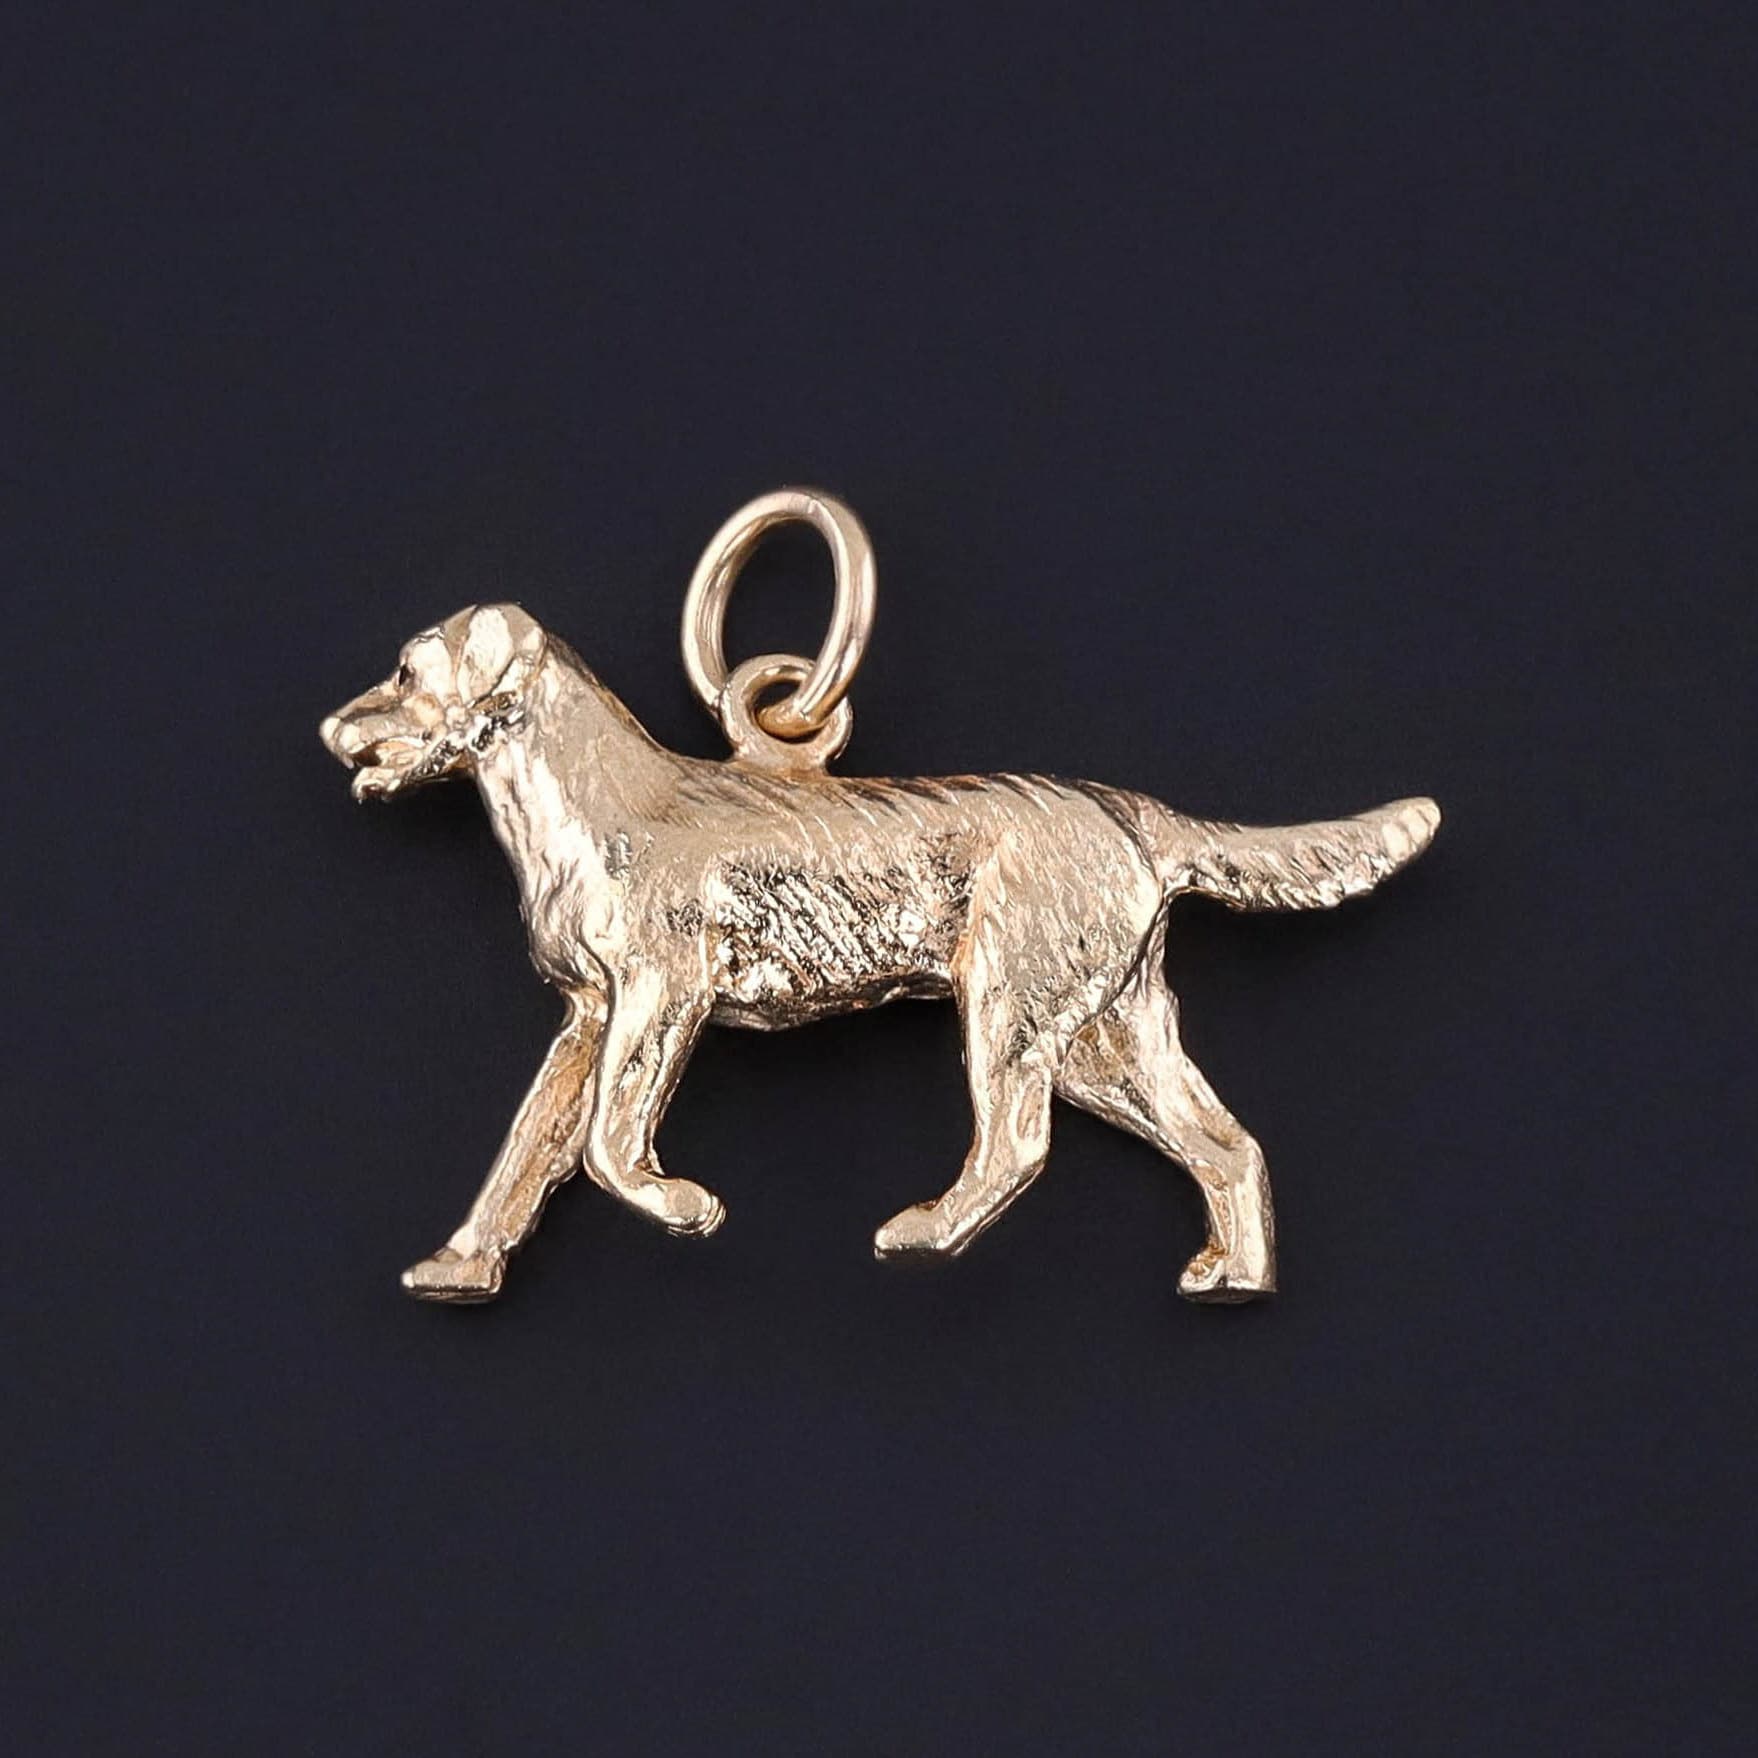 Vintage Golden Retriever Charm: This vintage charm (circa 1950-1970) features a dog crafted of solid 14k gold. The charm measures 0.8 inches from the top of the bail to bottom by 1 inch wide and weighs 6.02 grams. It is in great condition.